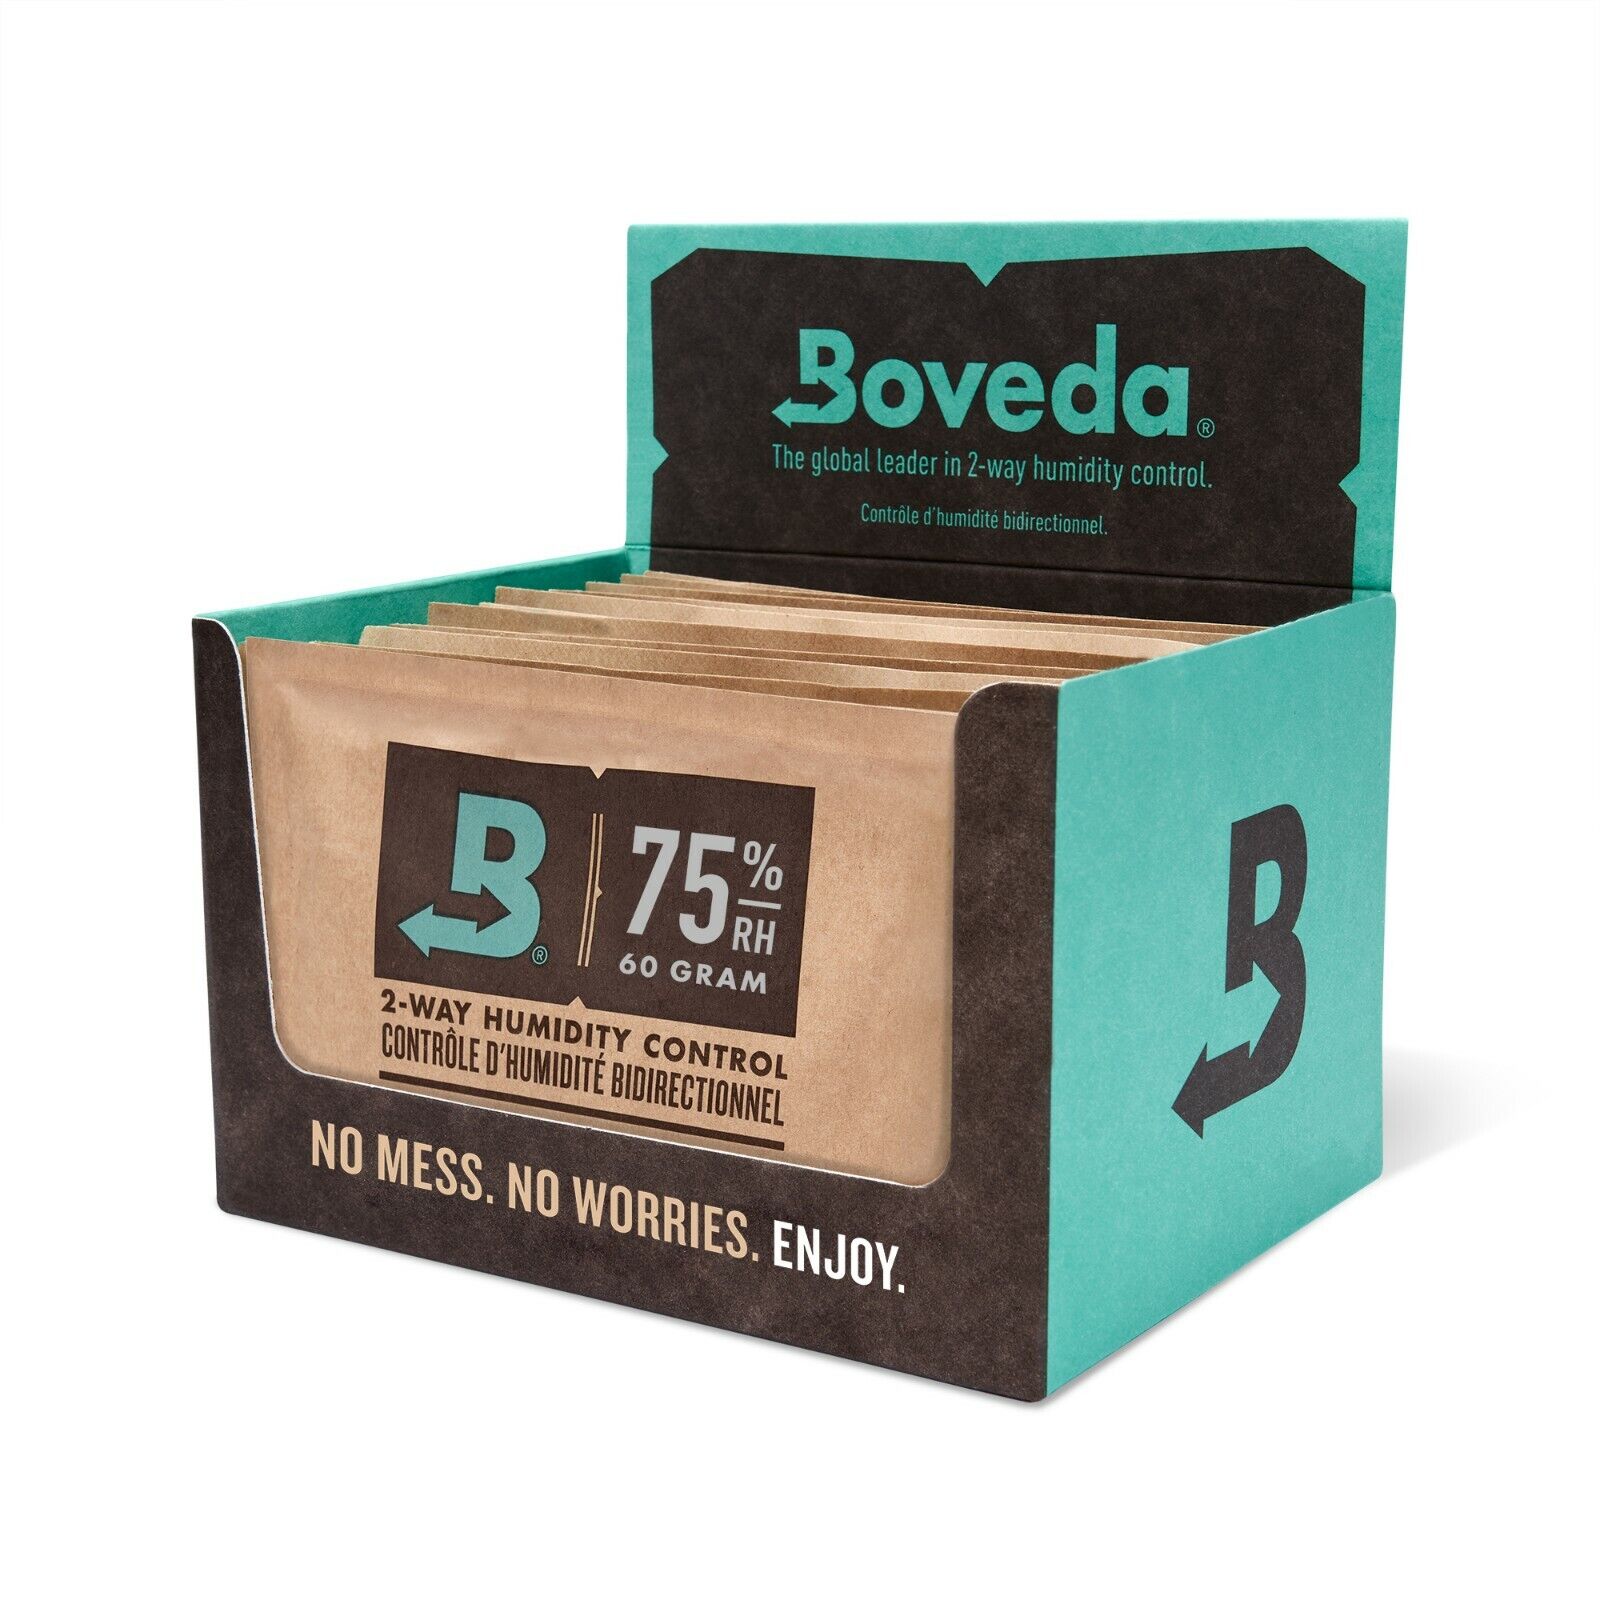 Boveda 75% RH 2-Way Humidity Control - Protects & Restores - Size 60 - 12 Count